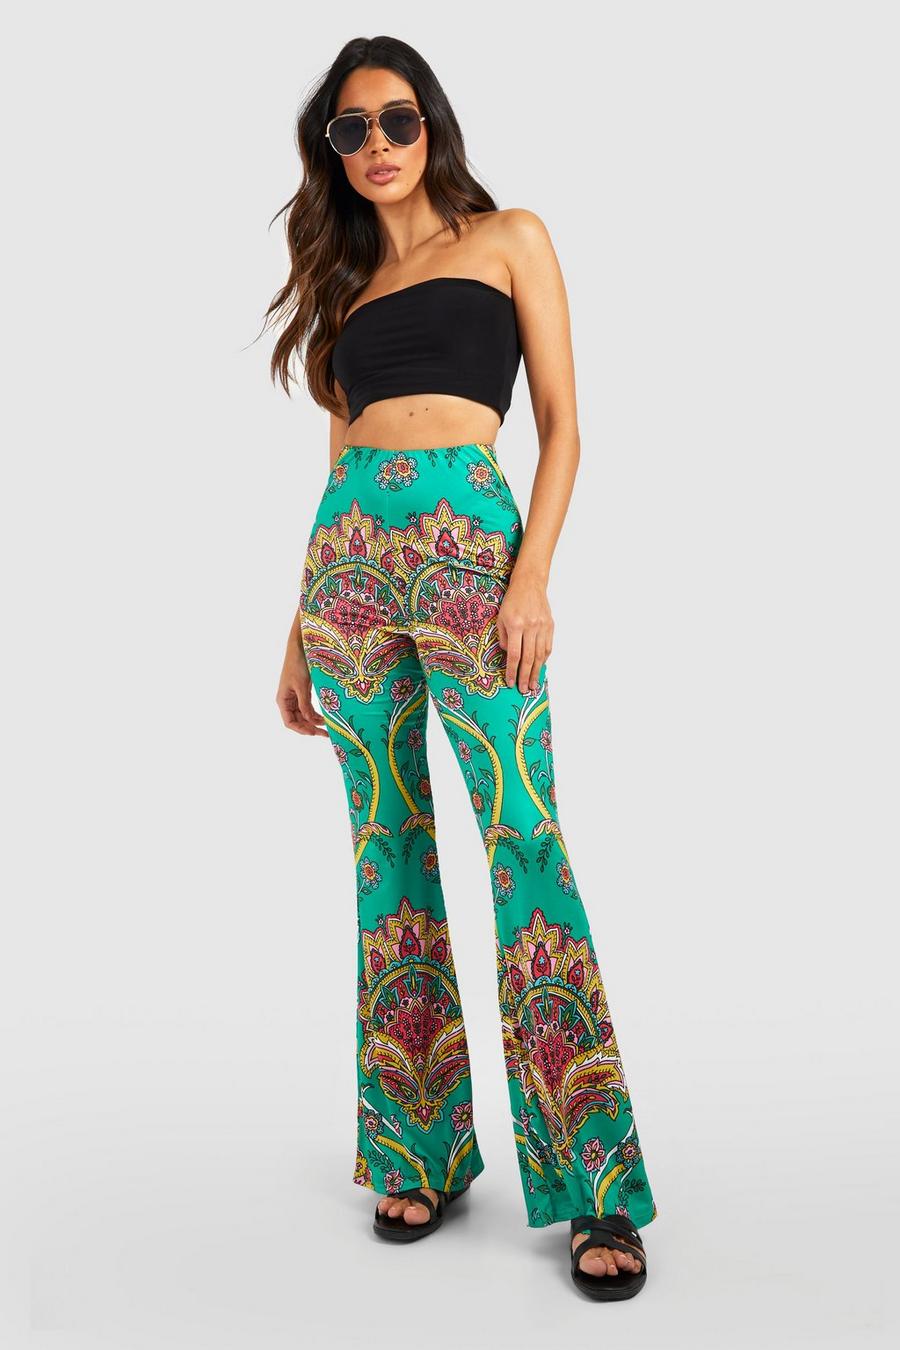 Buy Latest Flared Pants For Women In India